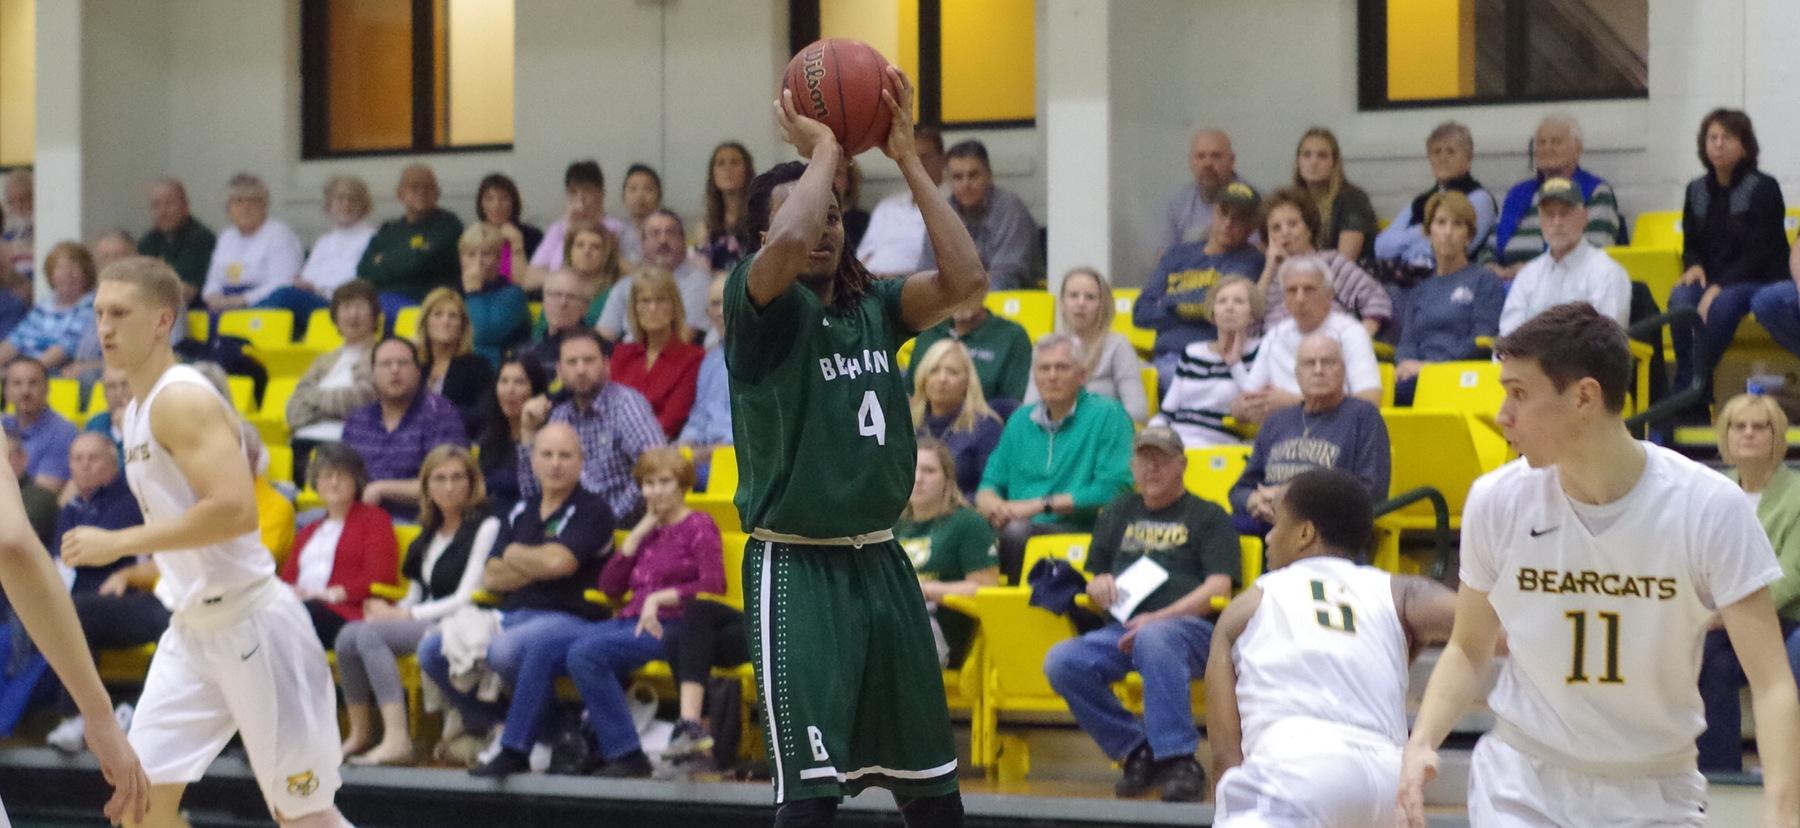 Bison downed by Saint Vincent in PAC semifinal, 74-65